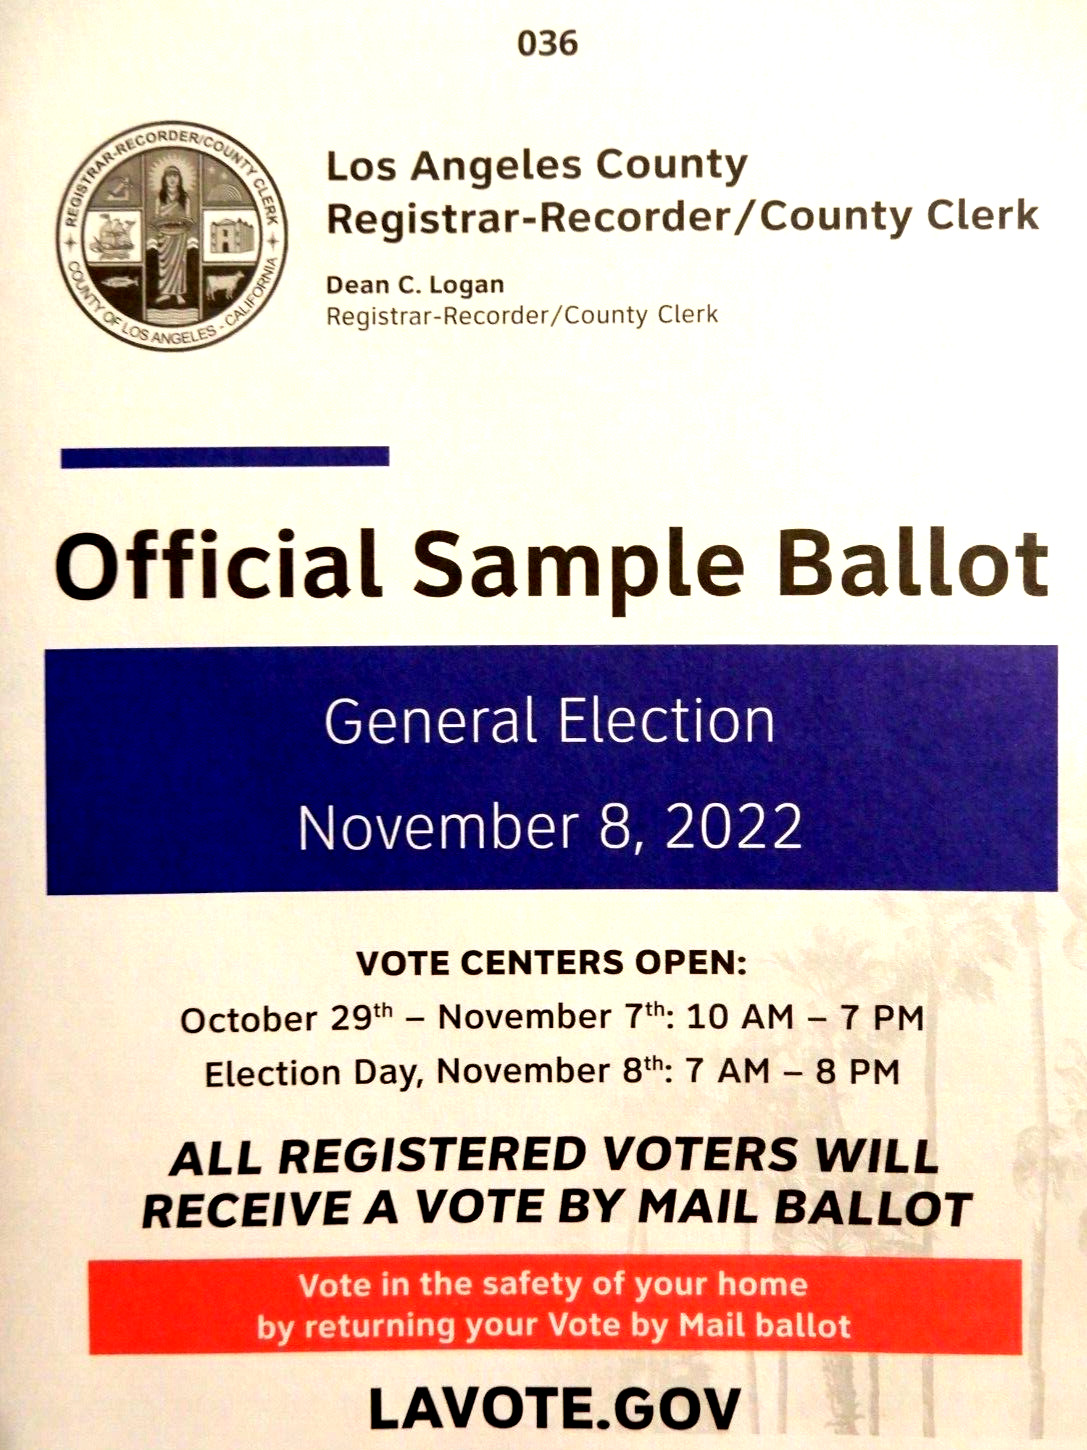 OFFICIAL SAMPLE BALLOT GENERAL ELECTION 2022 Los Angeles County CALIFORNIA VOTE